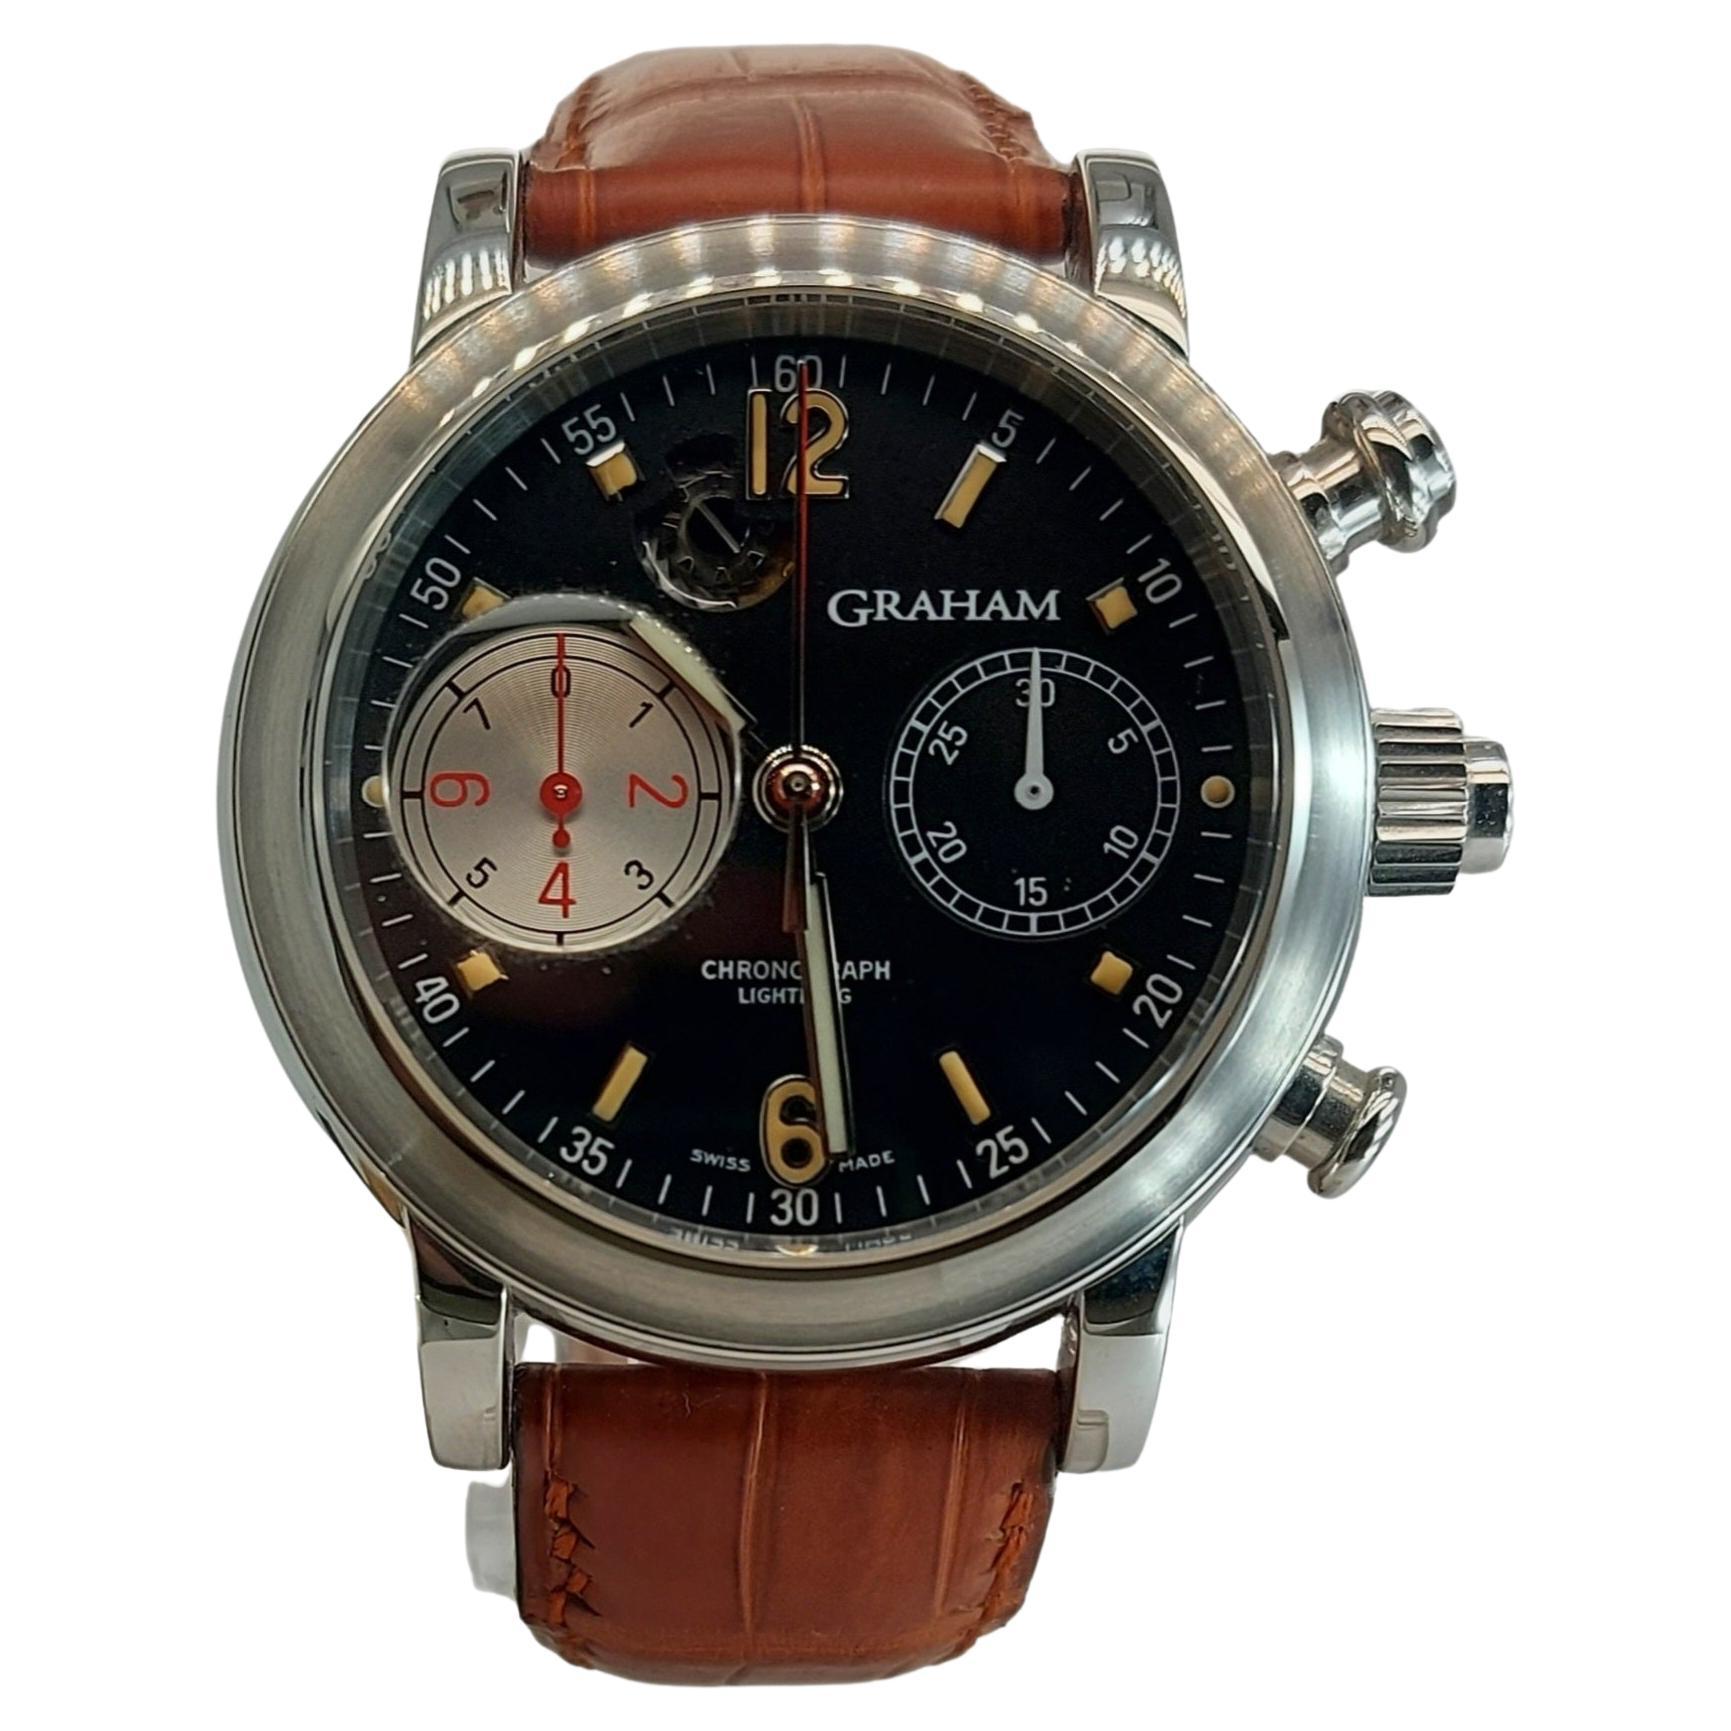 Graham Chronograph Foudroyante / Rattrapante Lightning NIB + All Warranty Papers For Sale